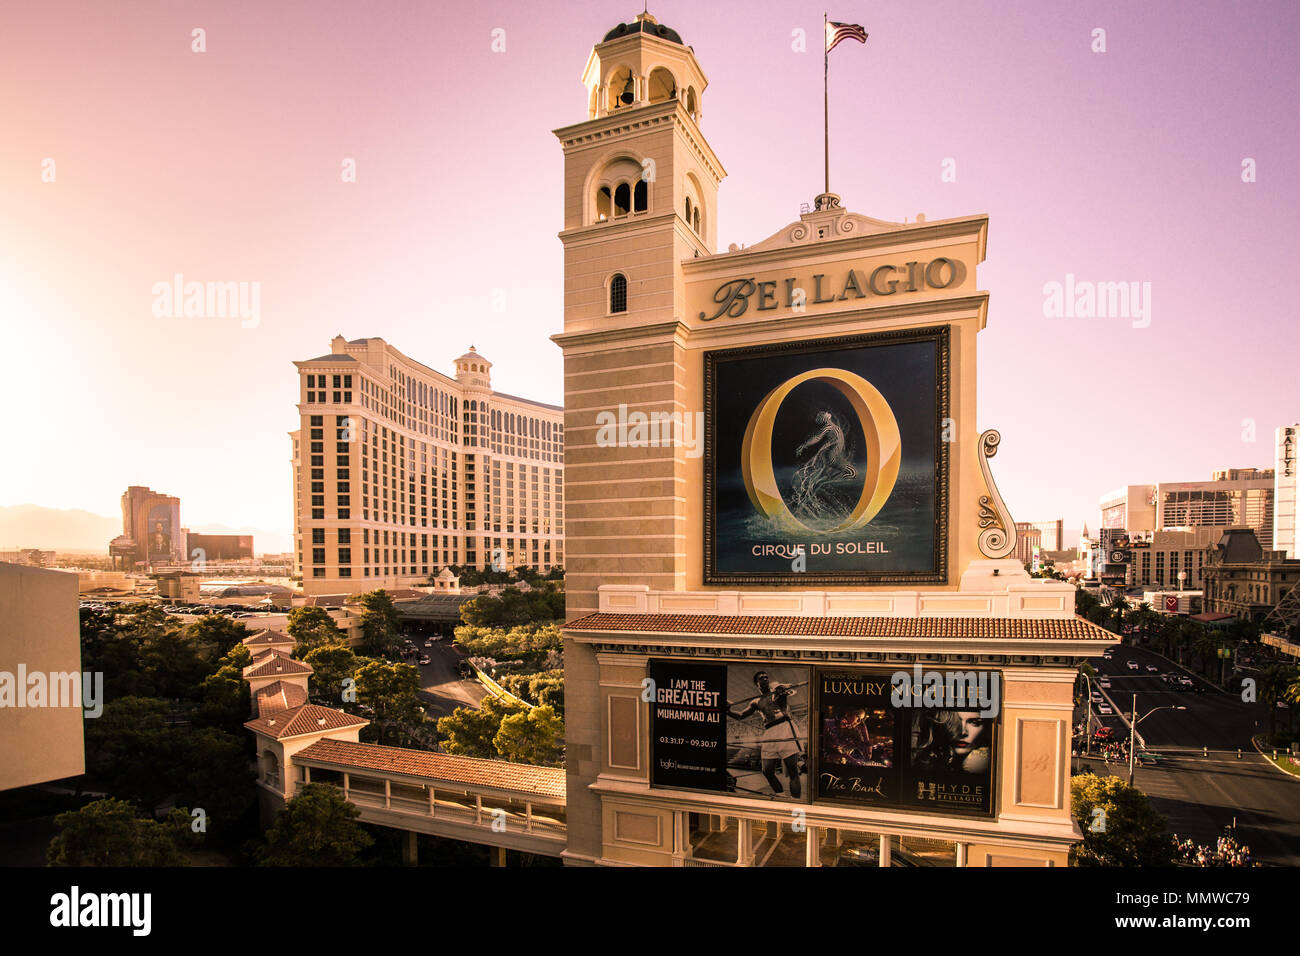 LAS VEGAS, NEVADA - MAY 17, 2017: View of sign for Bellagio luxury resort in Las Vegas Nevada with other hotel casinos in the background Stock Photo